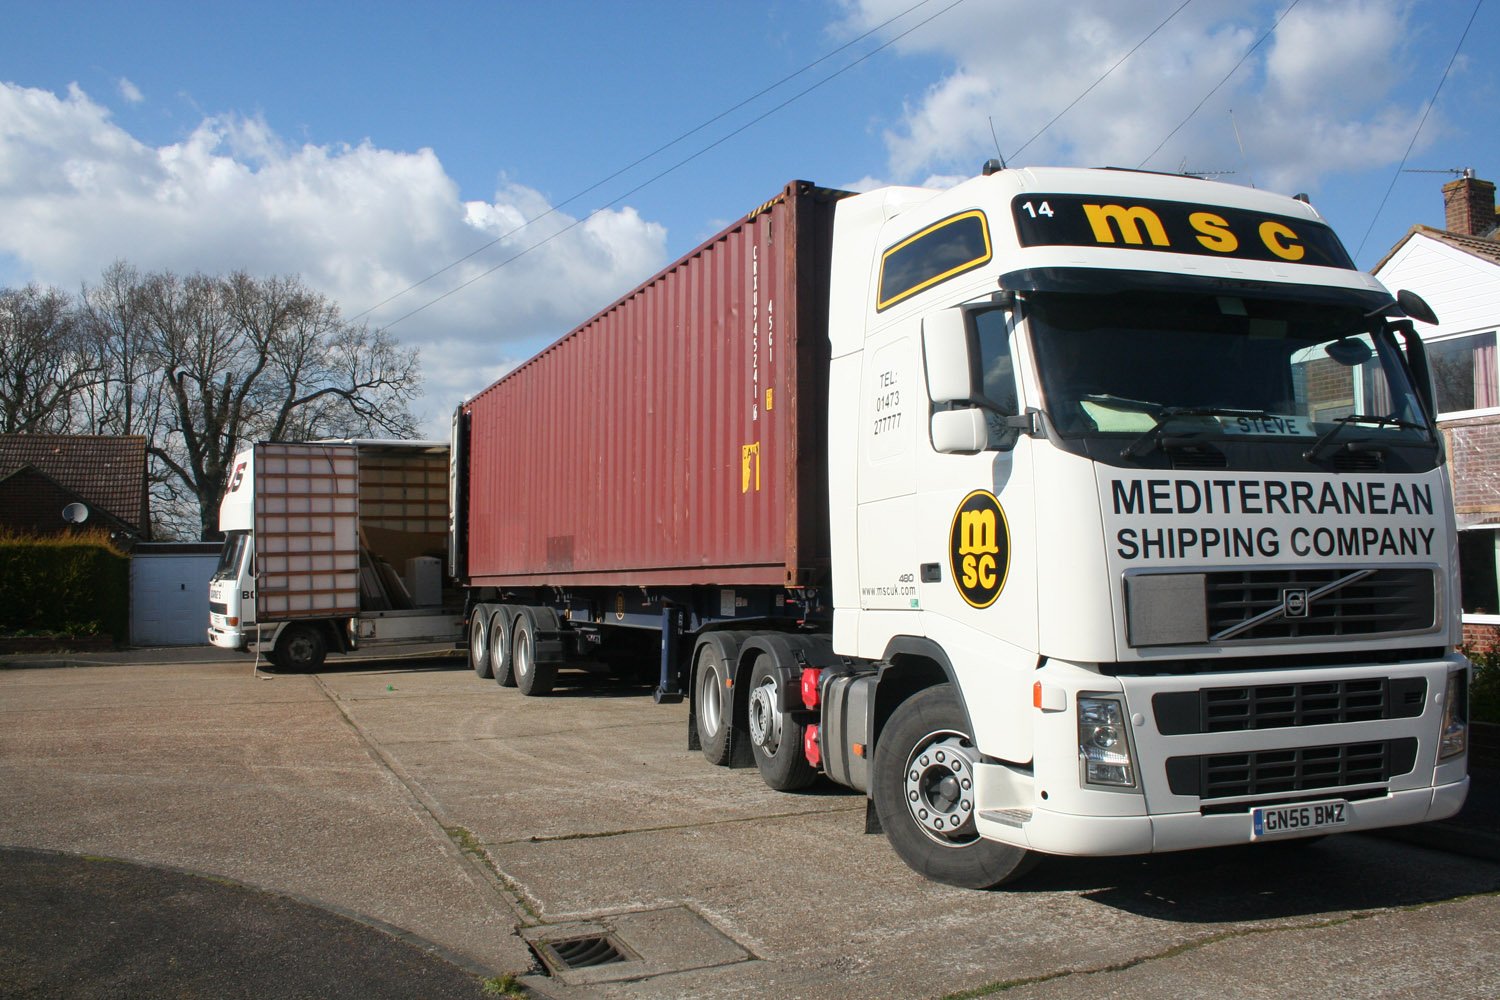 shipping container being loaded for moving from the UK to Australia